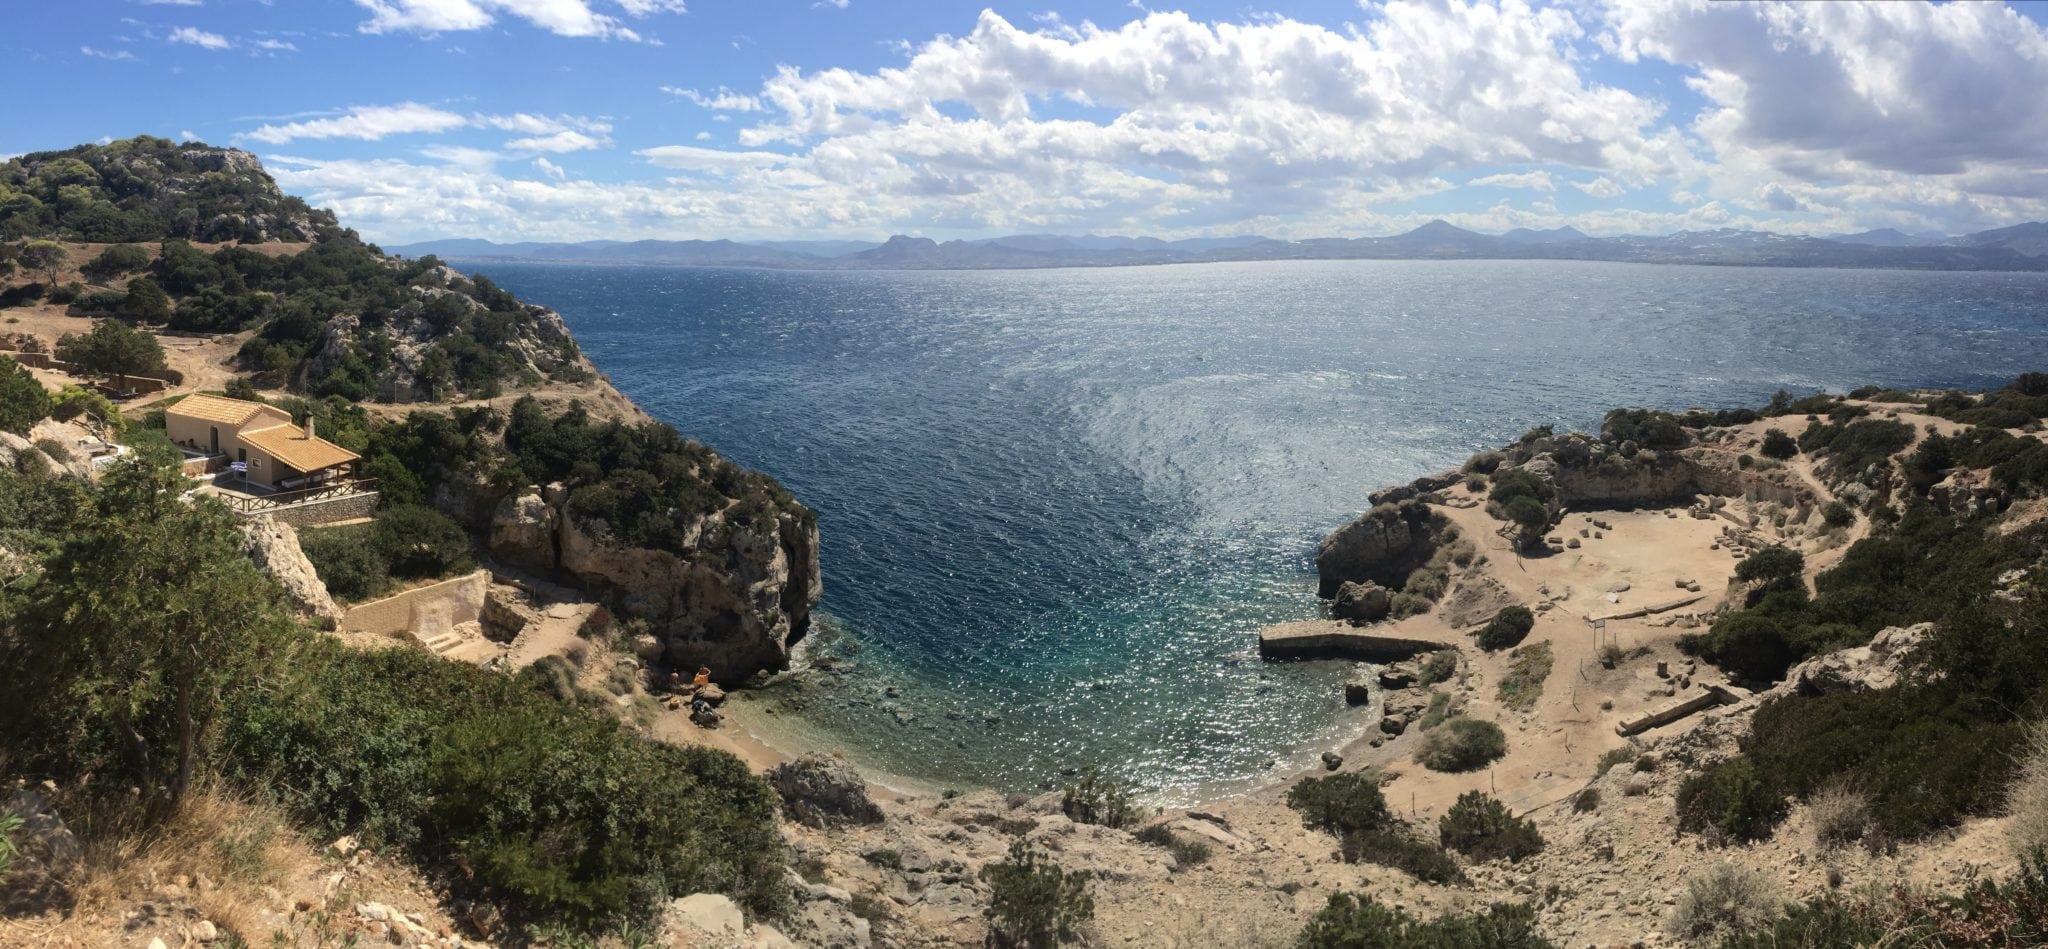 Best Things To Do in Loutraki, Greece